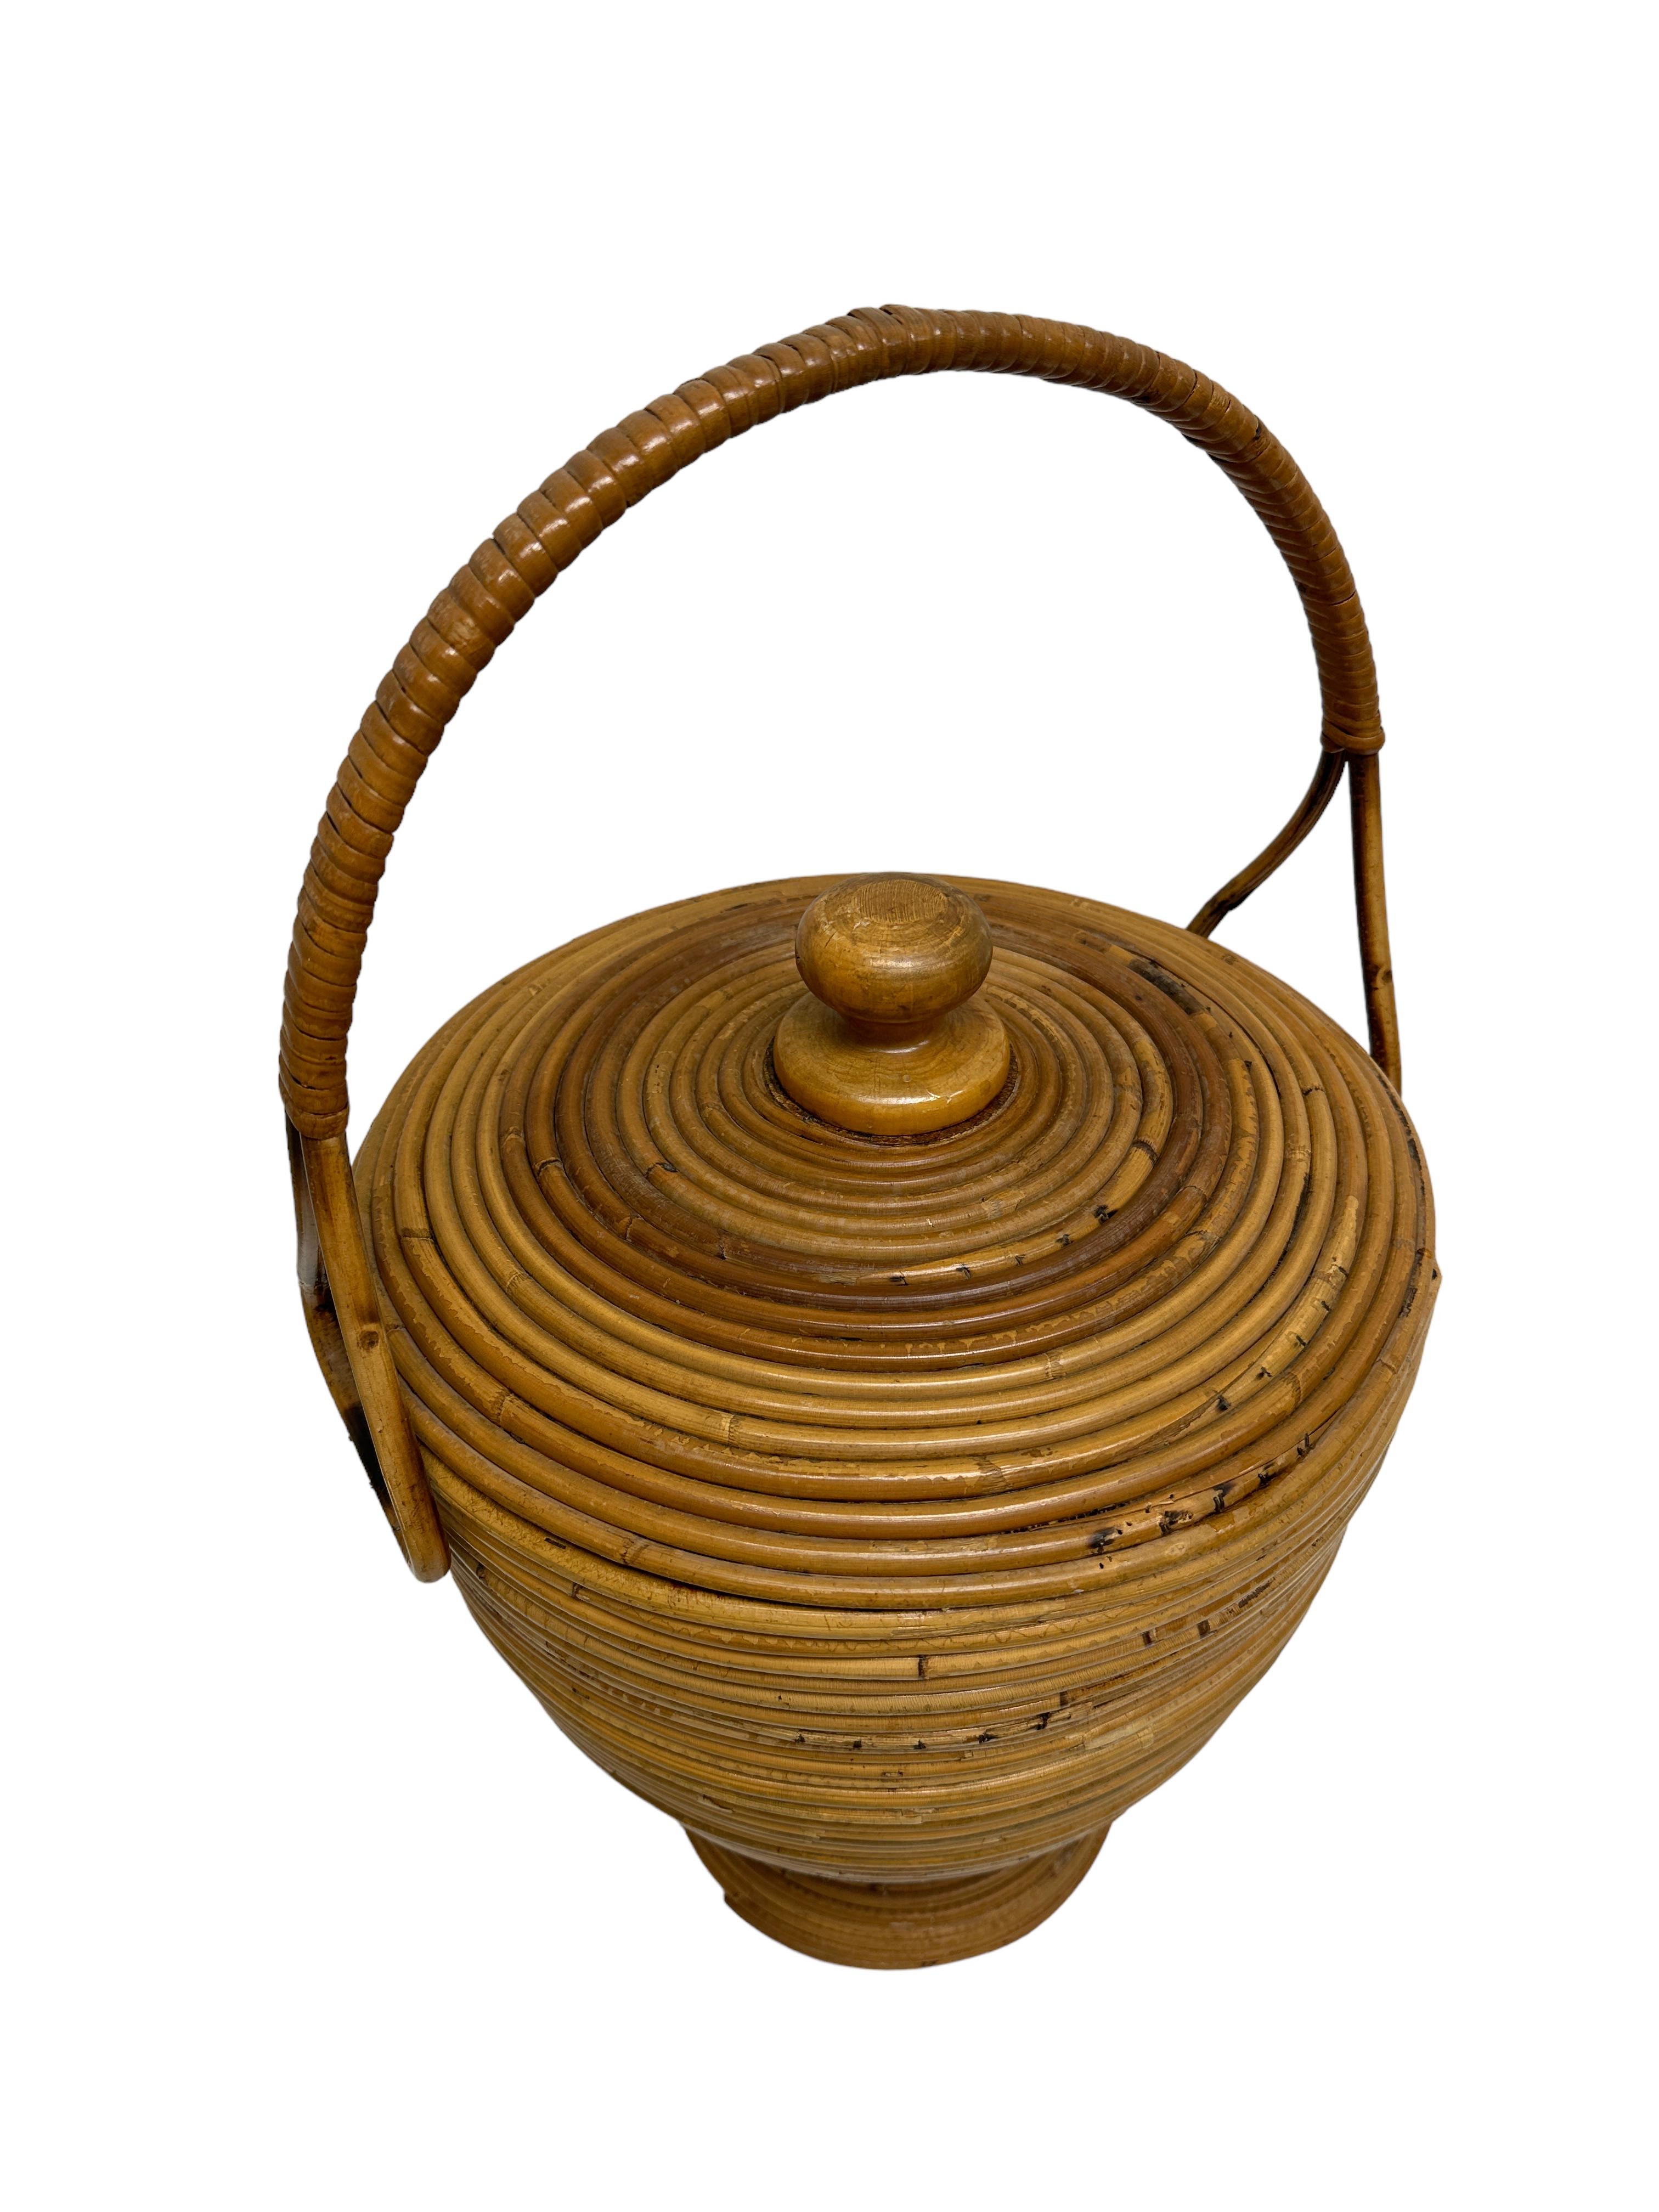 Late 20th Century Beautiful Vivai del Sud Bamboo Rattan Decorative Basket Catchall, 1970s, Italy For Sale